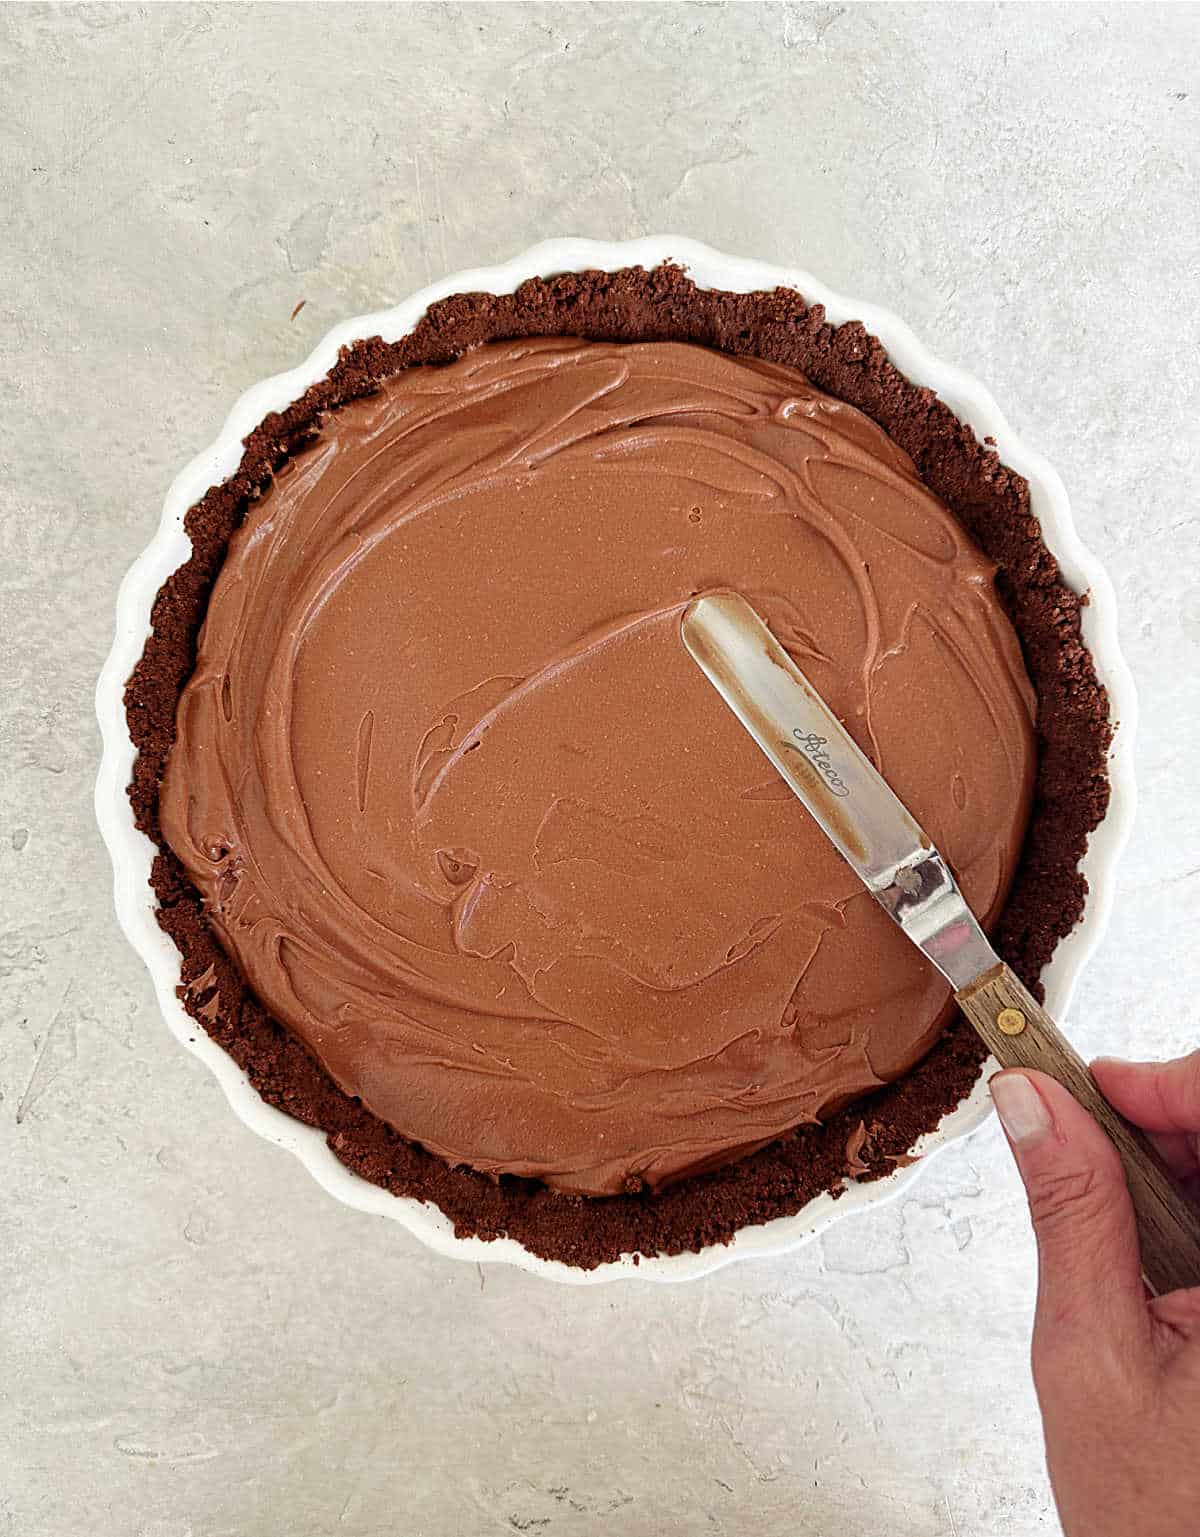 Spreading chocolate cheesecake filling on a chocolate crust with an offset spatula. White dish on grey surface.